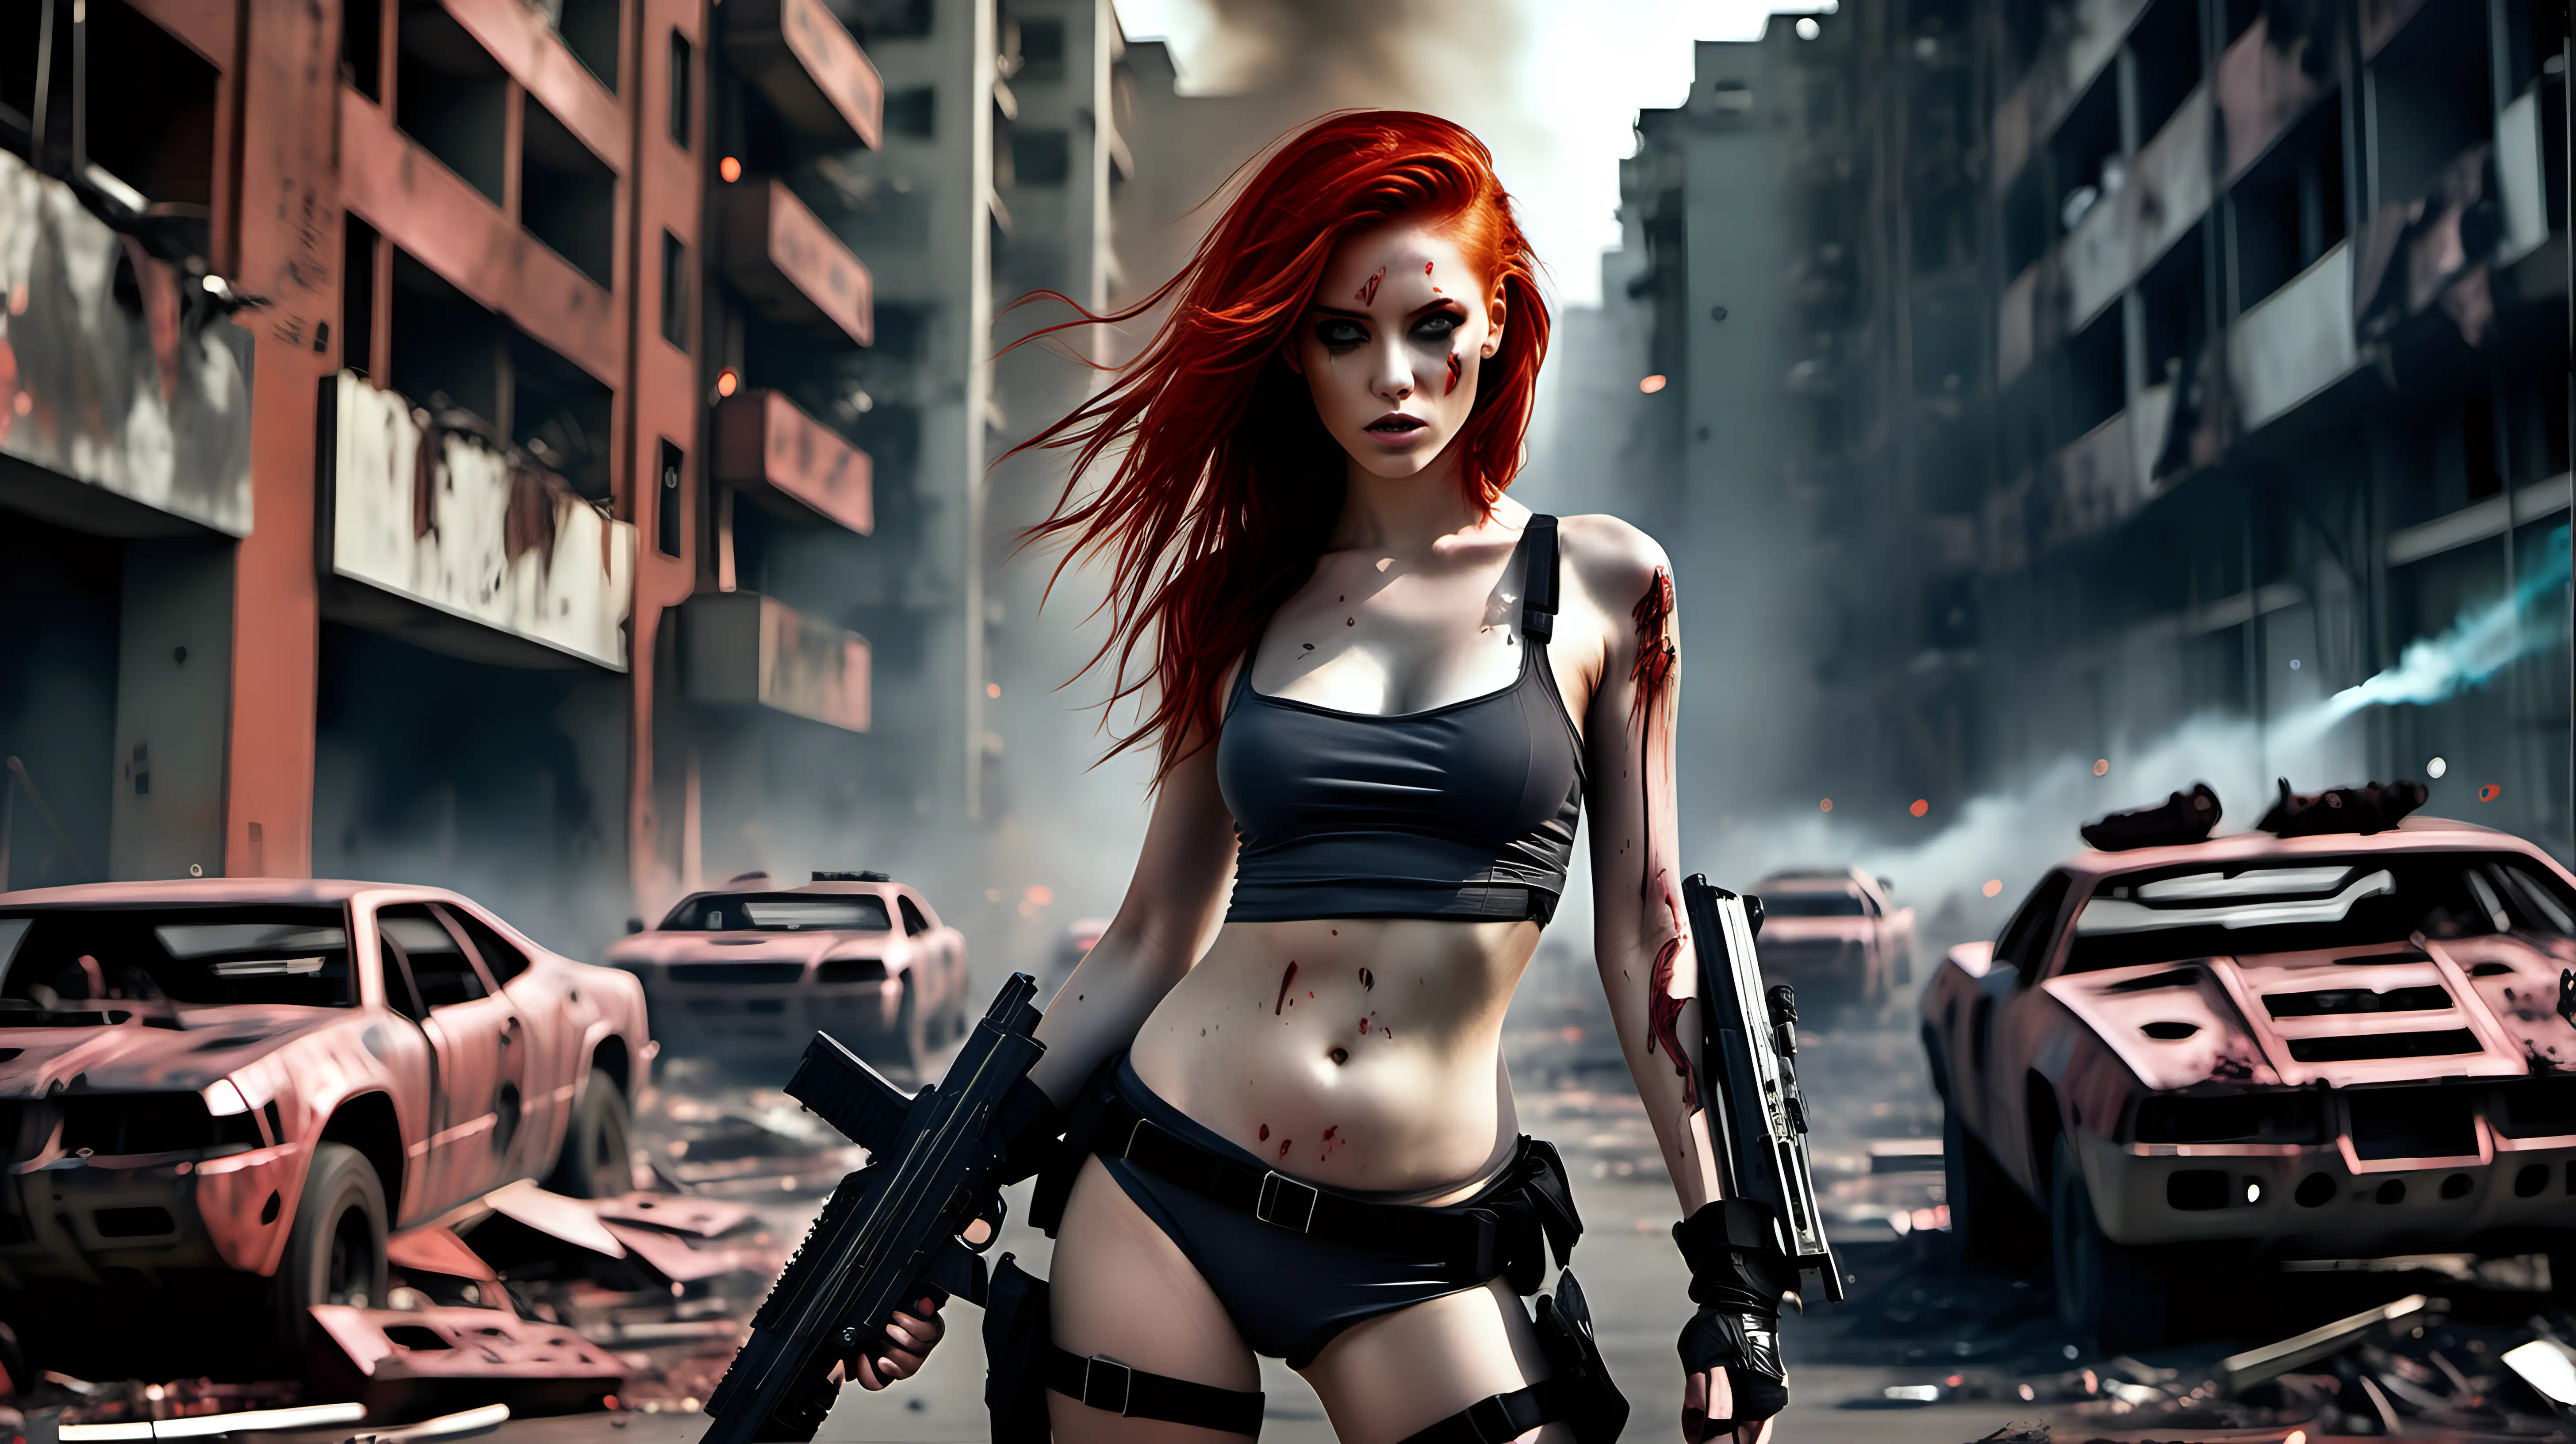 create a realistic picture of the same beautiful young woman with her red hair loose, scantily clad in a dystopian city of the future with weapons in motion, vandalized cars behind her, houses burning in the area and a battle with the terminators
